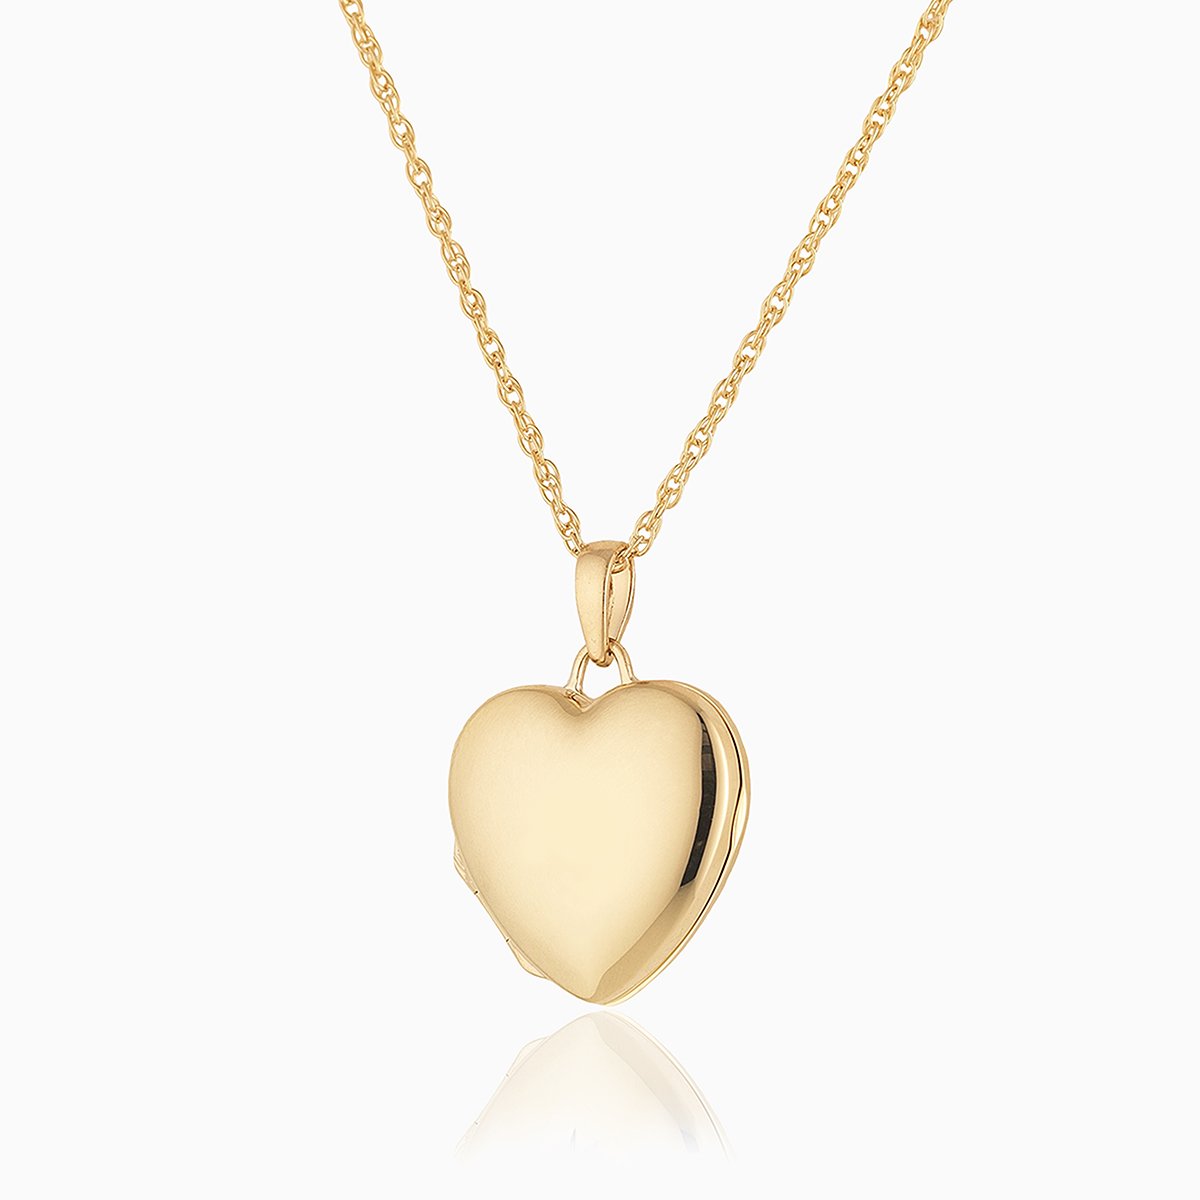 9 ct gold polished heart locket on a 9 ct gold rope chain